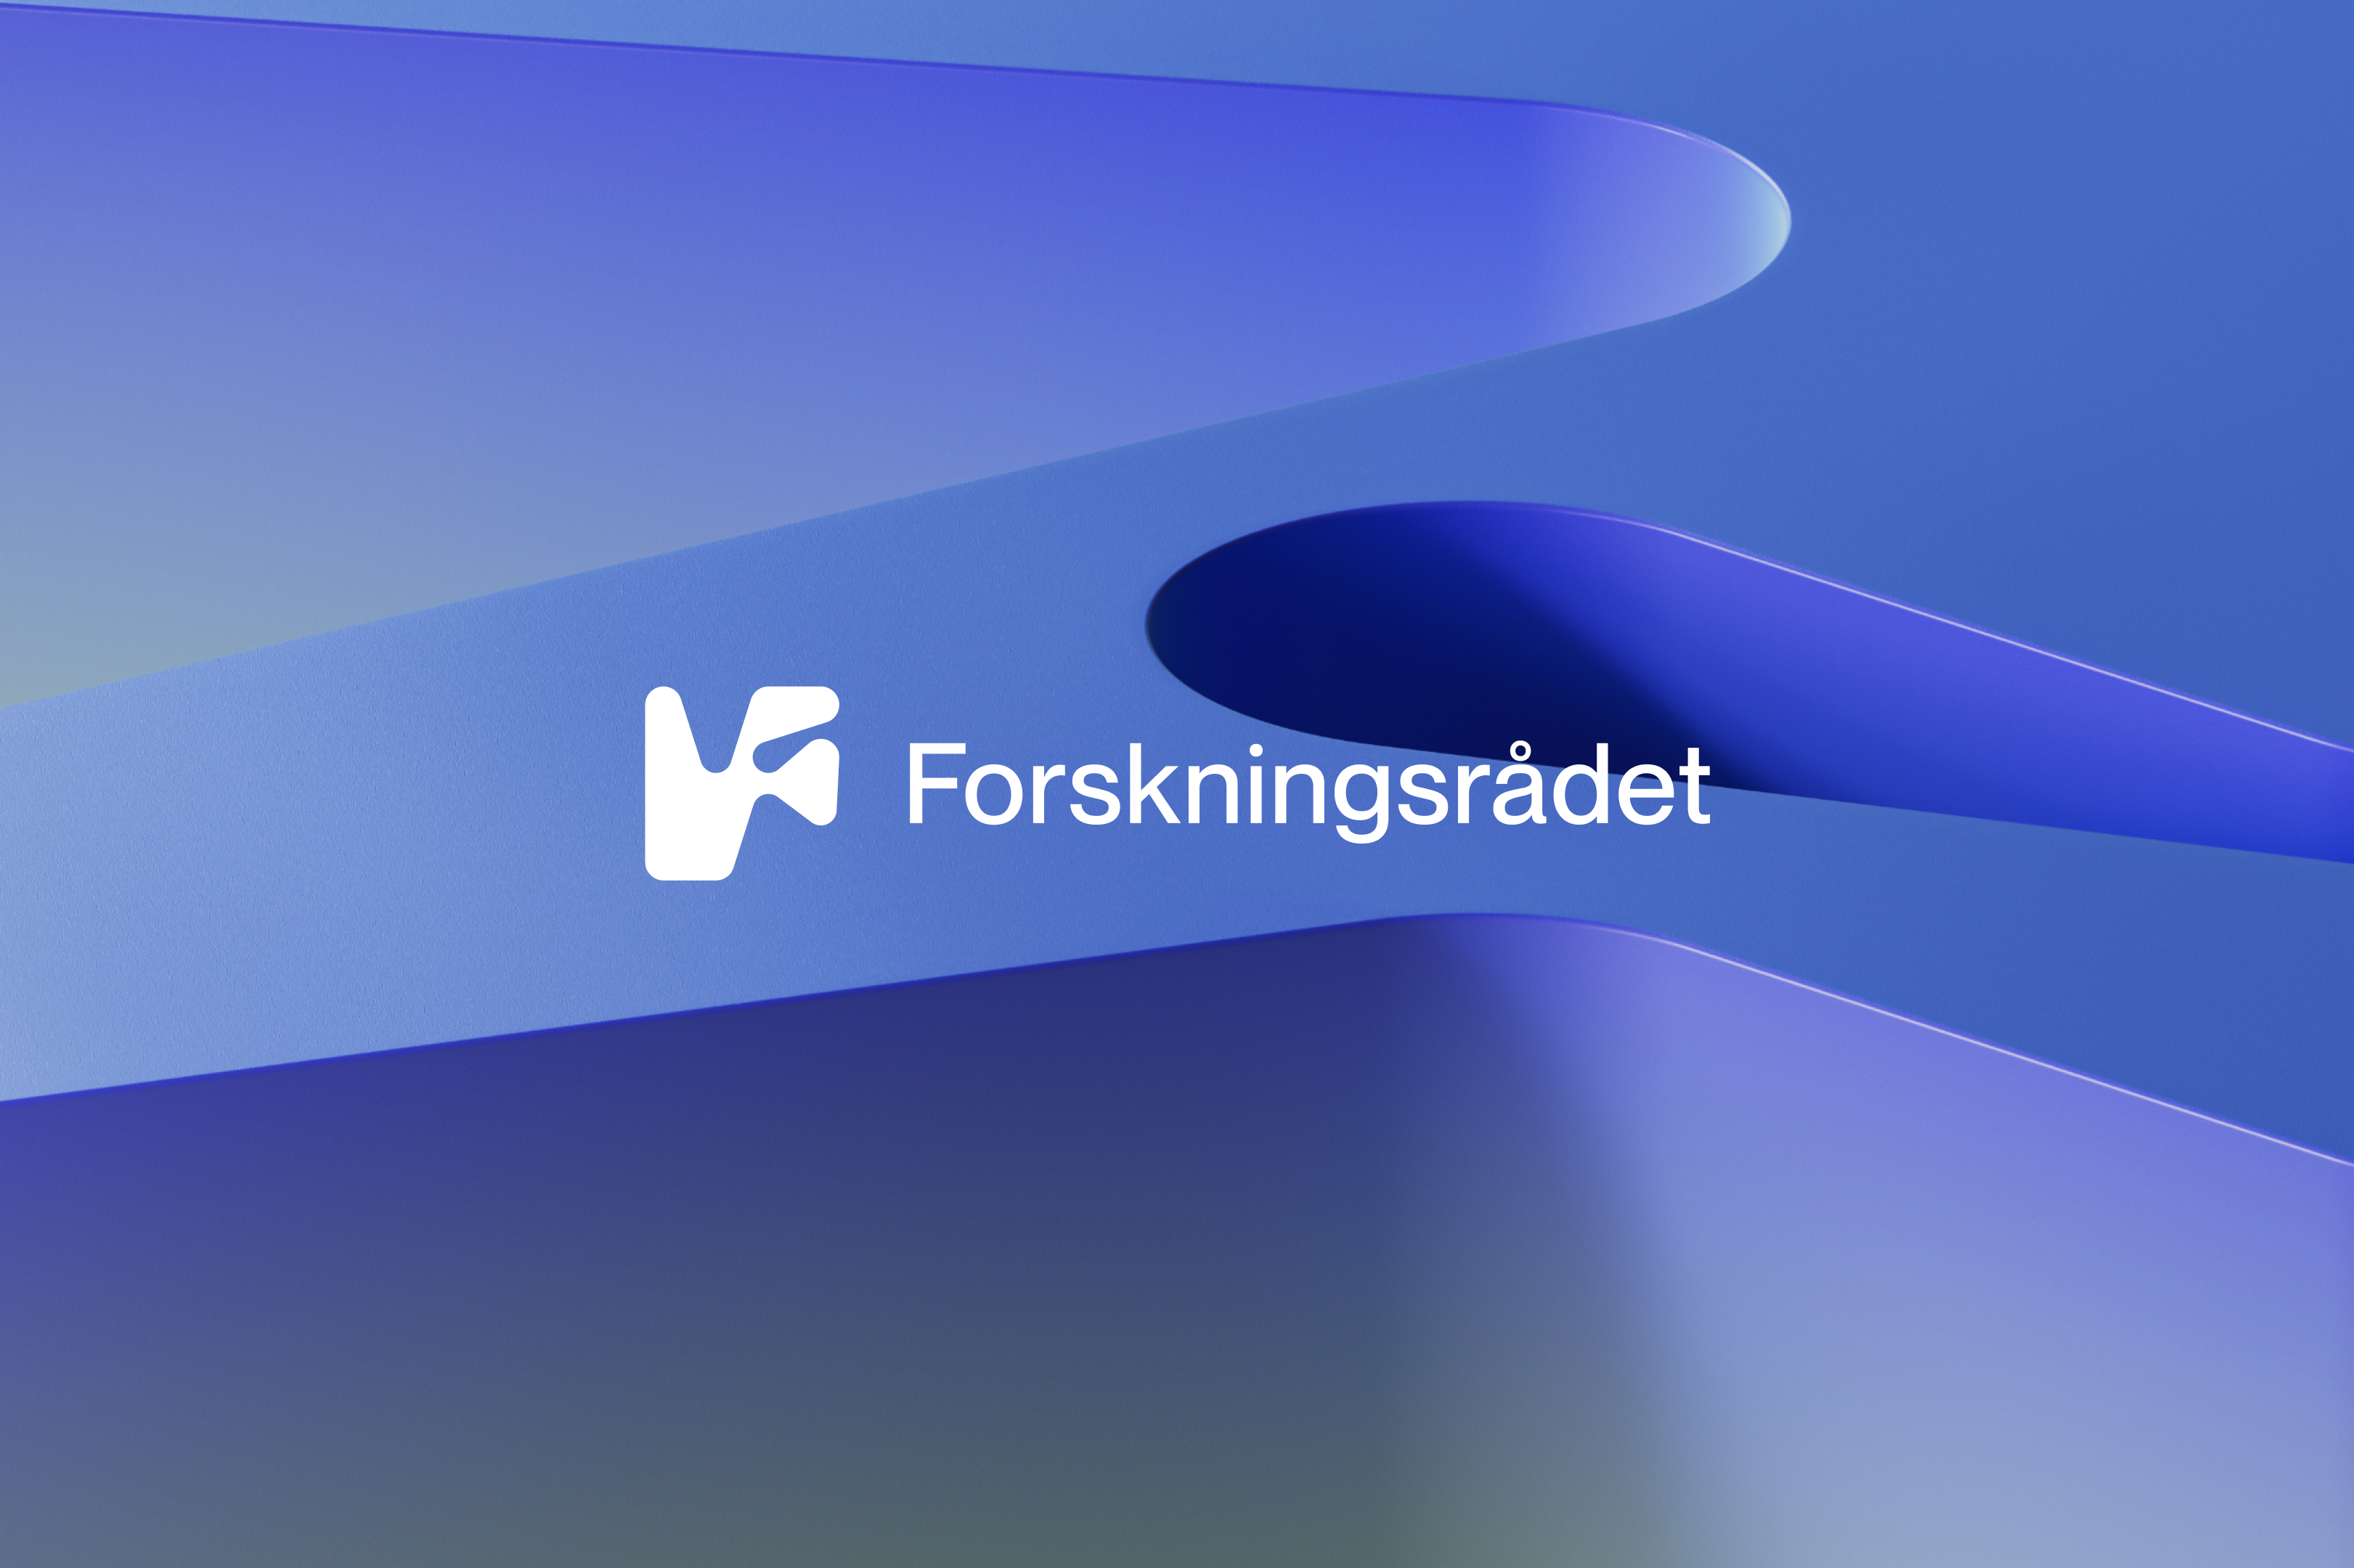 Logo, Brand identity and 3d graphics by ANTI for The Norwegian Research Council